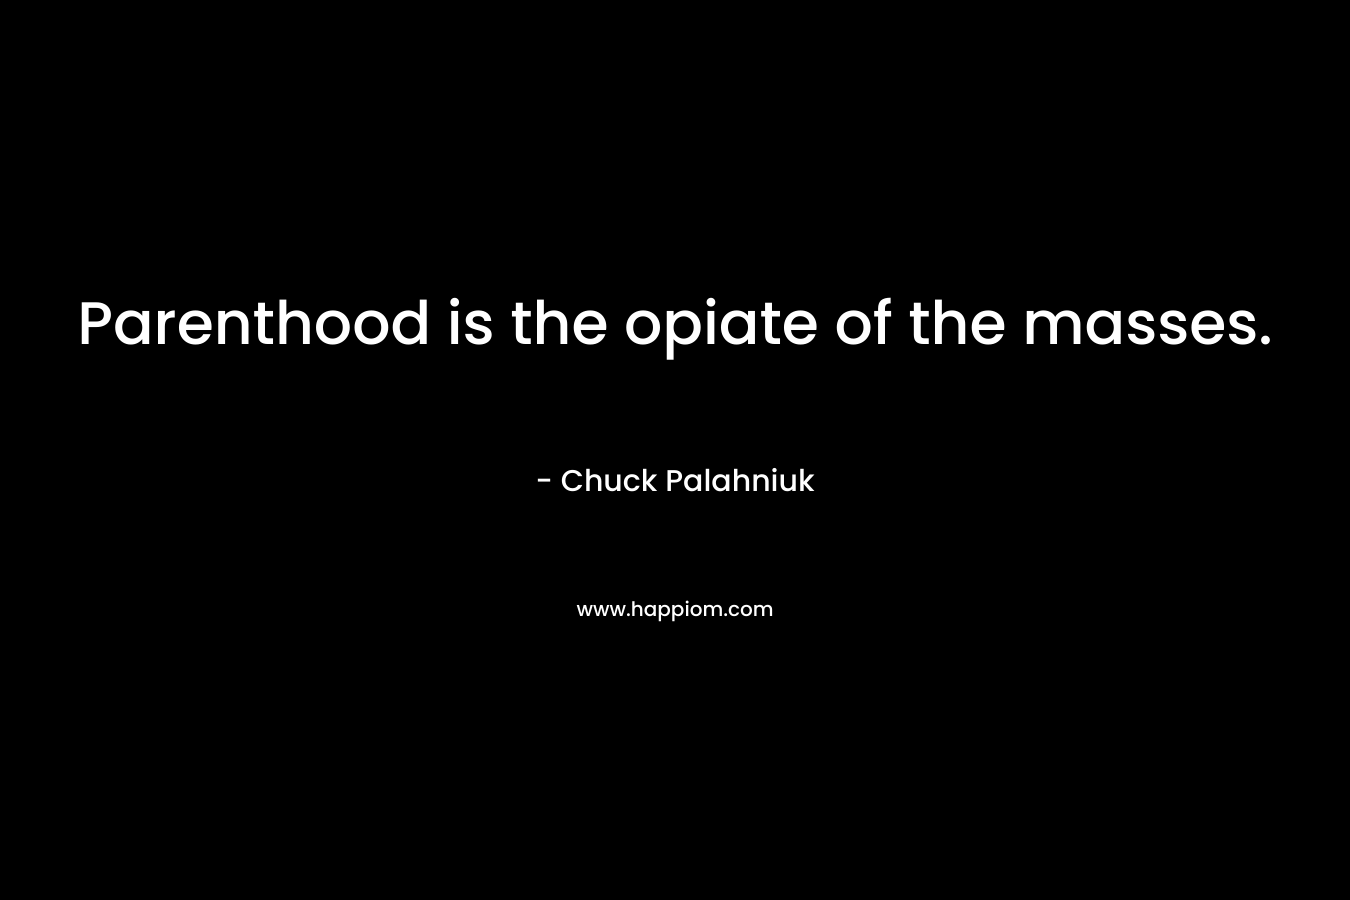 Parenthood is the opiate of the masses. – Chuck Palahniuk